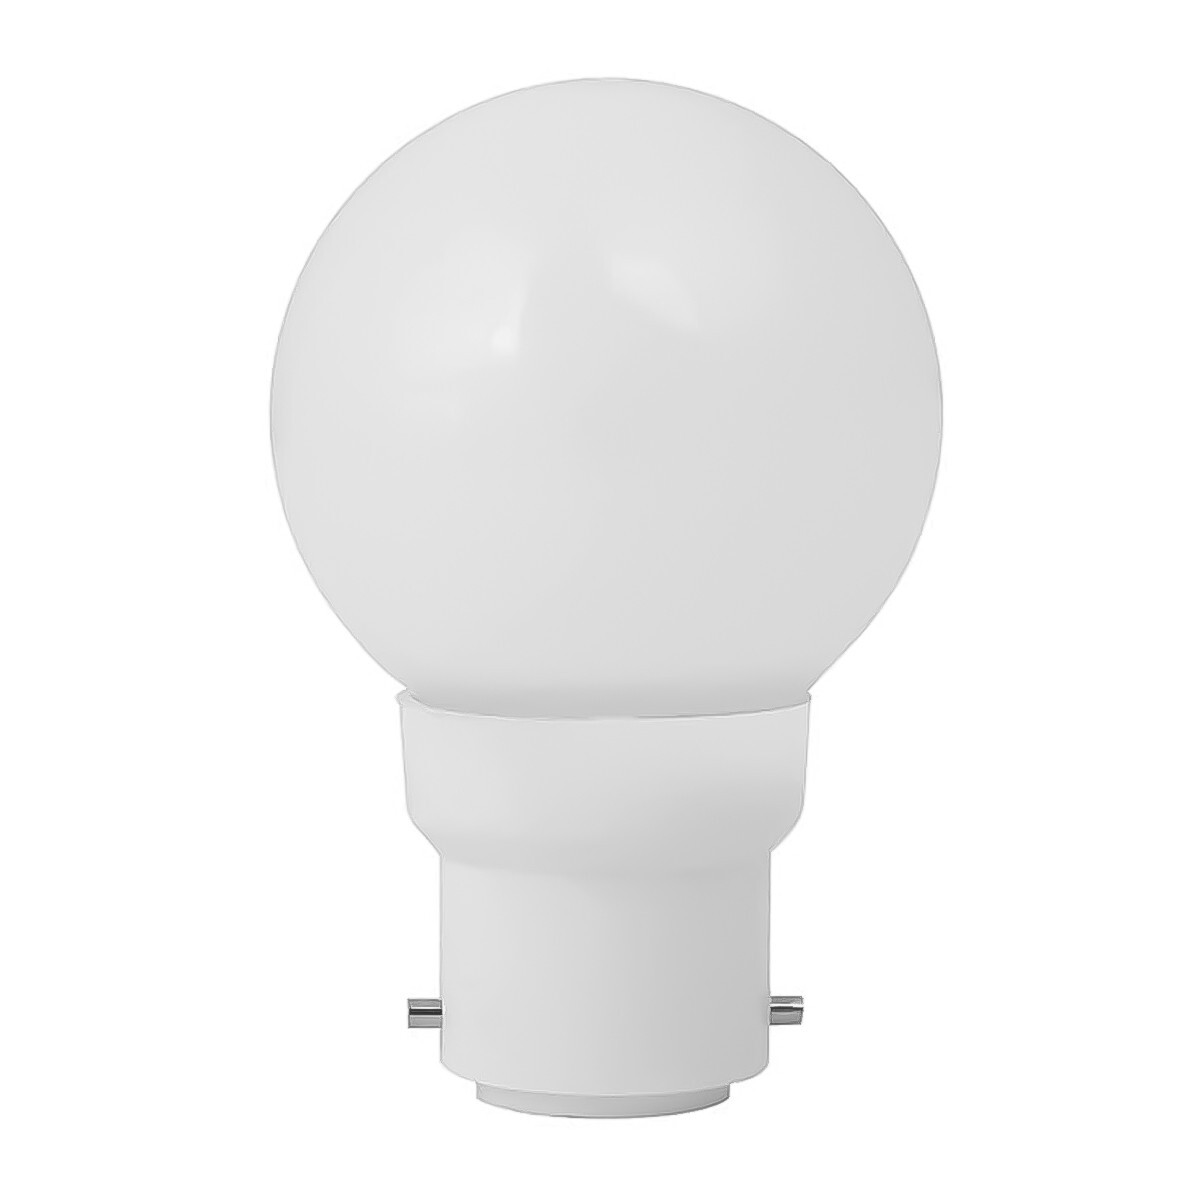 Havells LED Adore White Lamp 0.5W